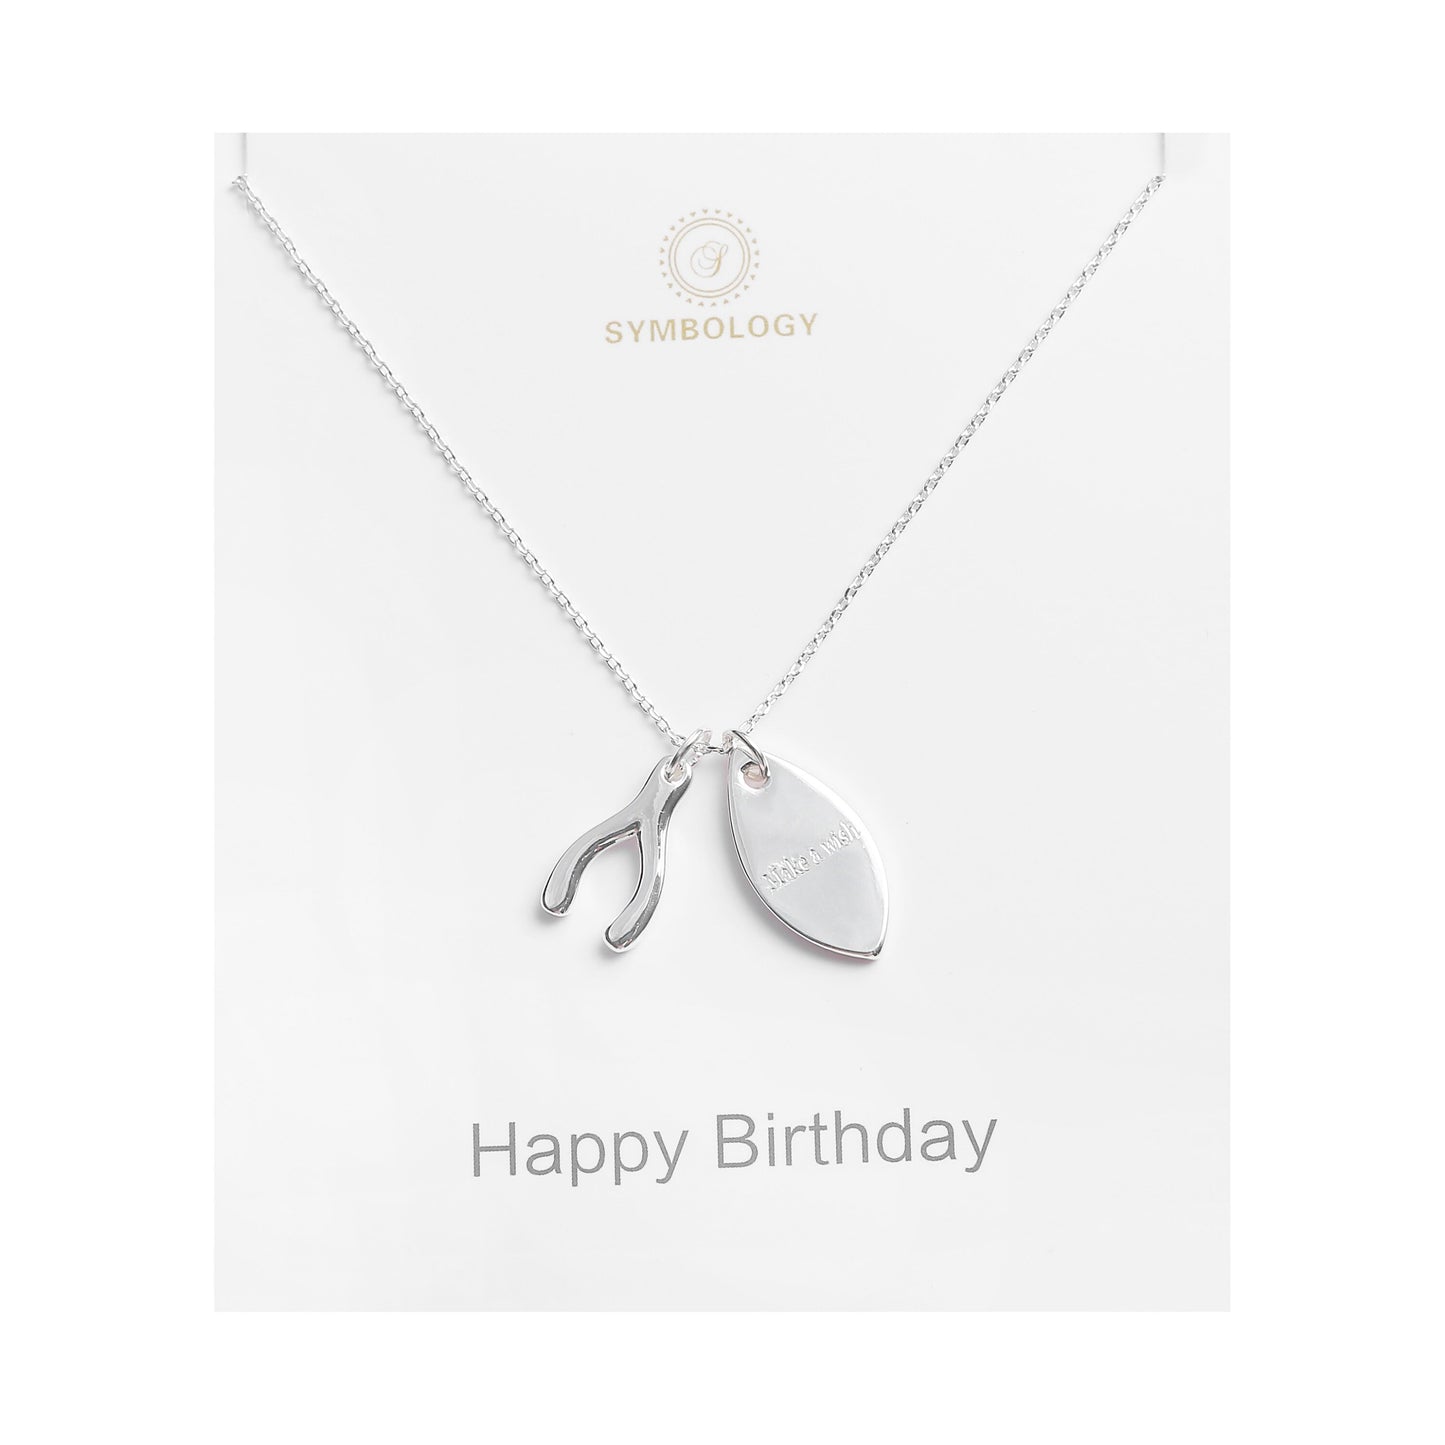 Happy Birthday Personalised Necklace, Silver Wish Bone Charm, Birthstone Initial Pendant, Sentimental Womens Jewellery, Bday Gift for Her